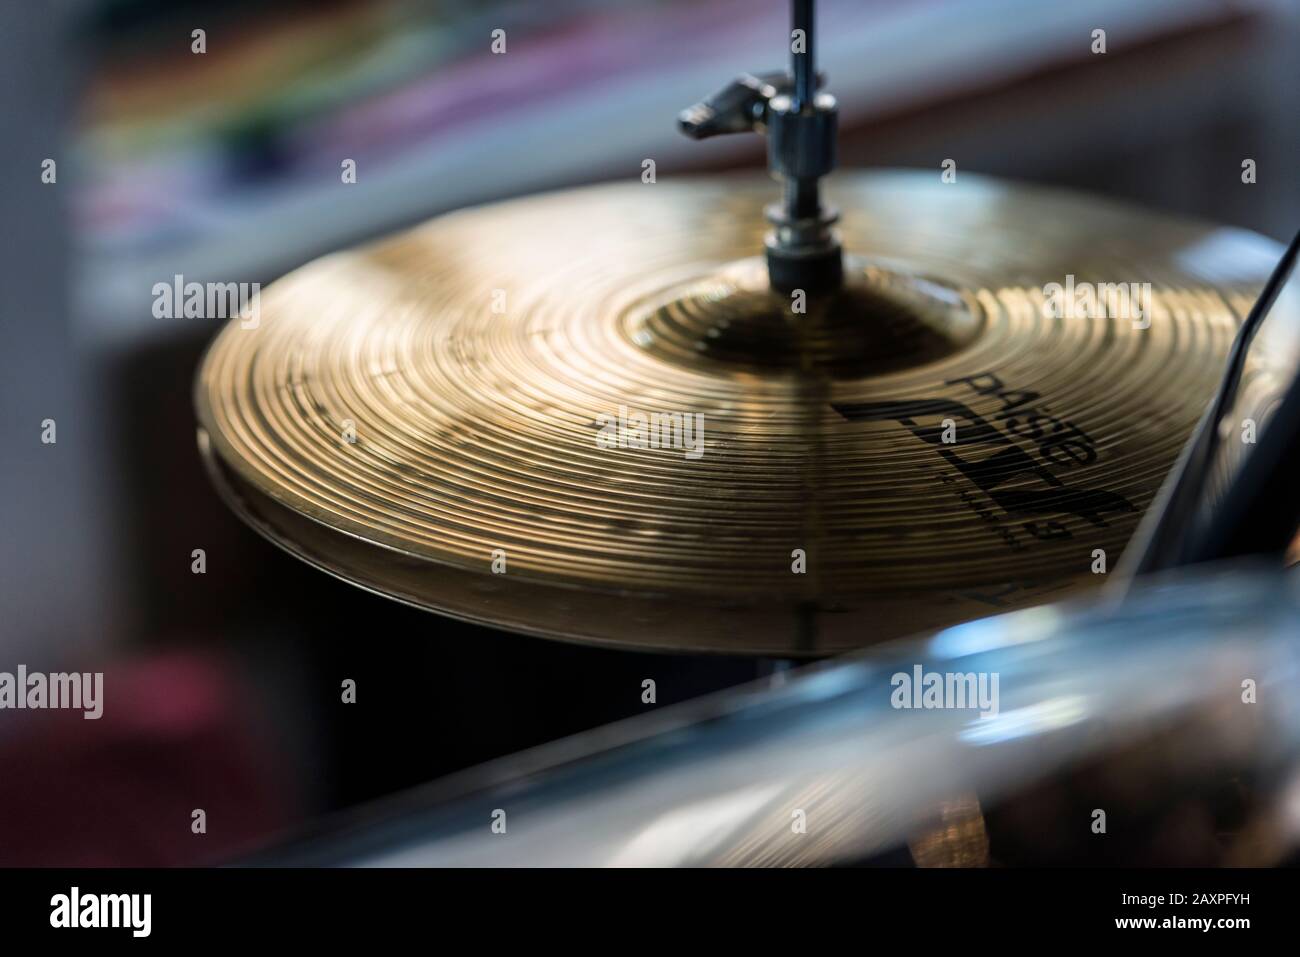 Cymbals of a drum kit Stock Photo